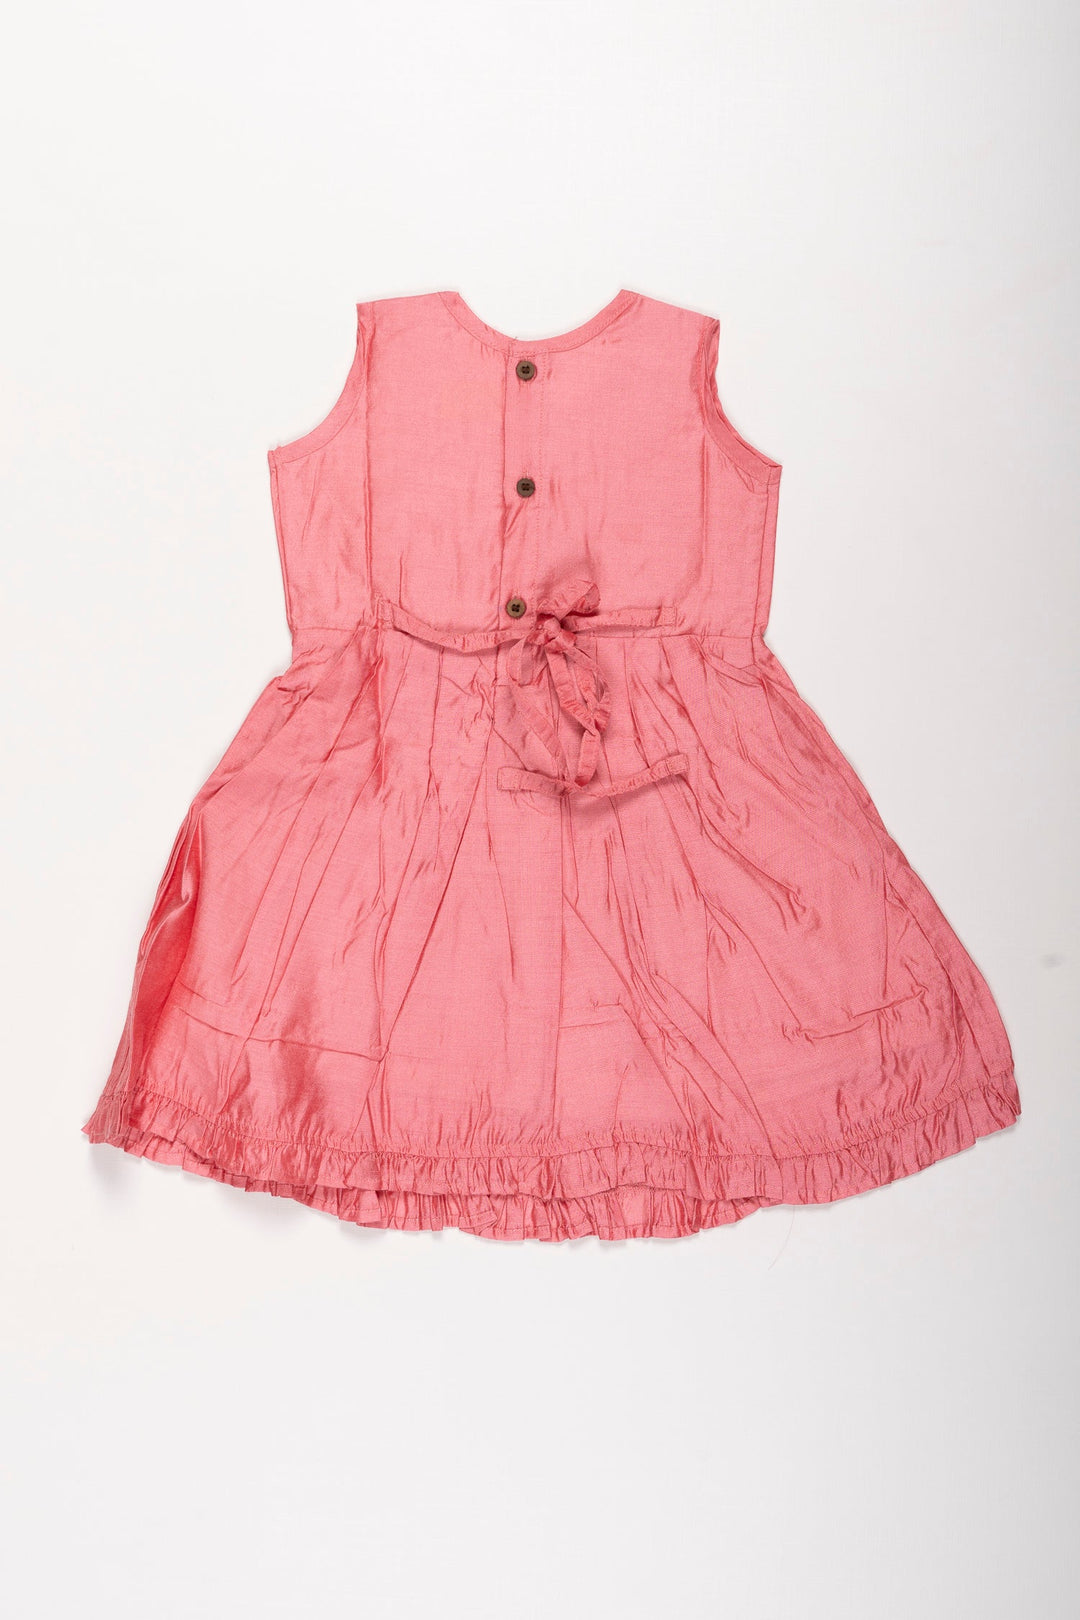 The Nesavu Girls Cotton Frock Girls Pleated Summer Cotton Frock with Lace Detailing - Casual Chic Nesavu Chic Lace-Detailed Cotton Frock for Girls | Must-Have Summer Collection | The Nesavu